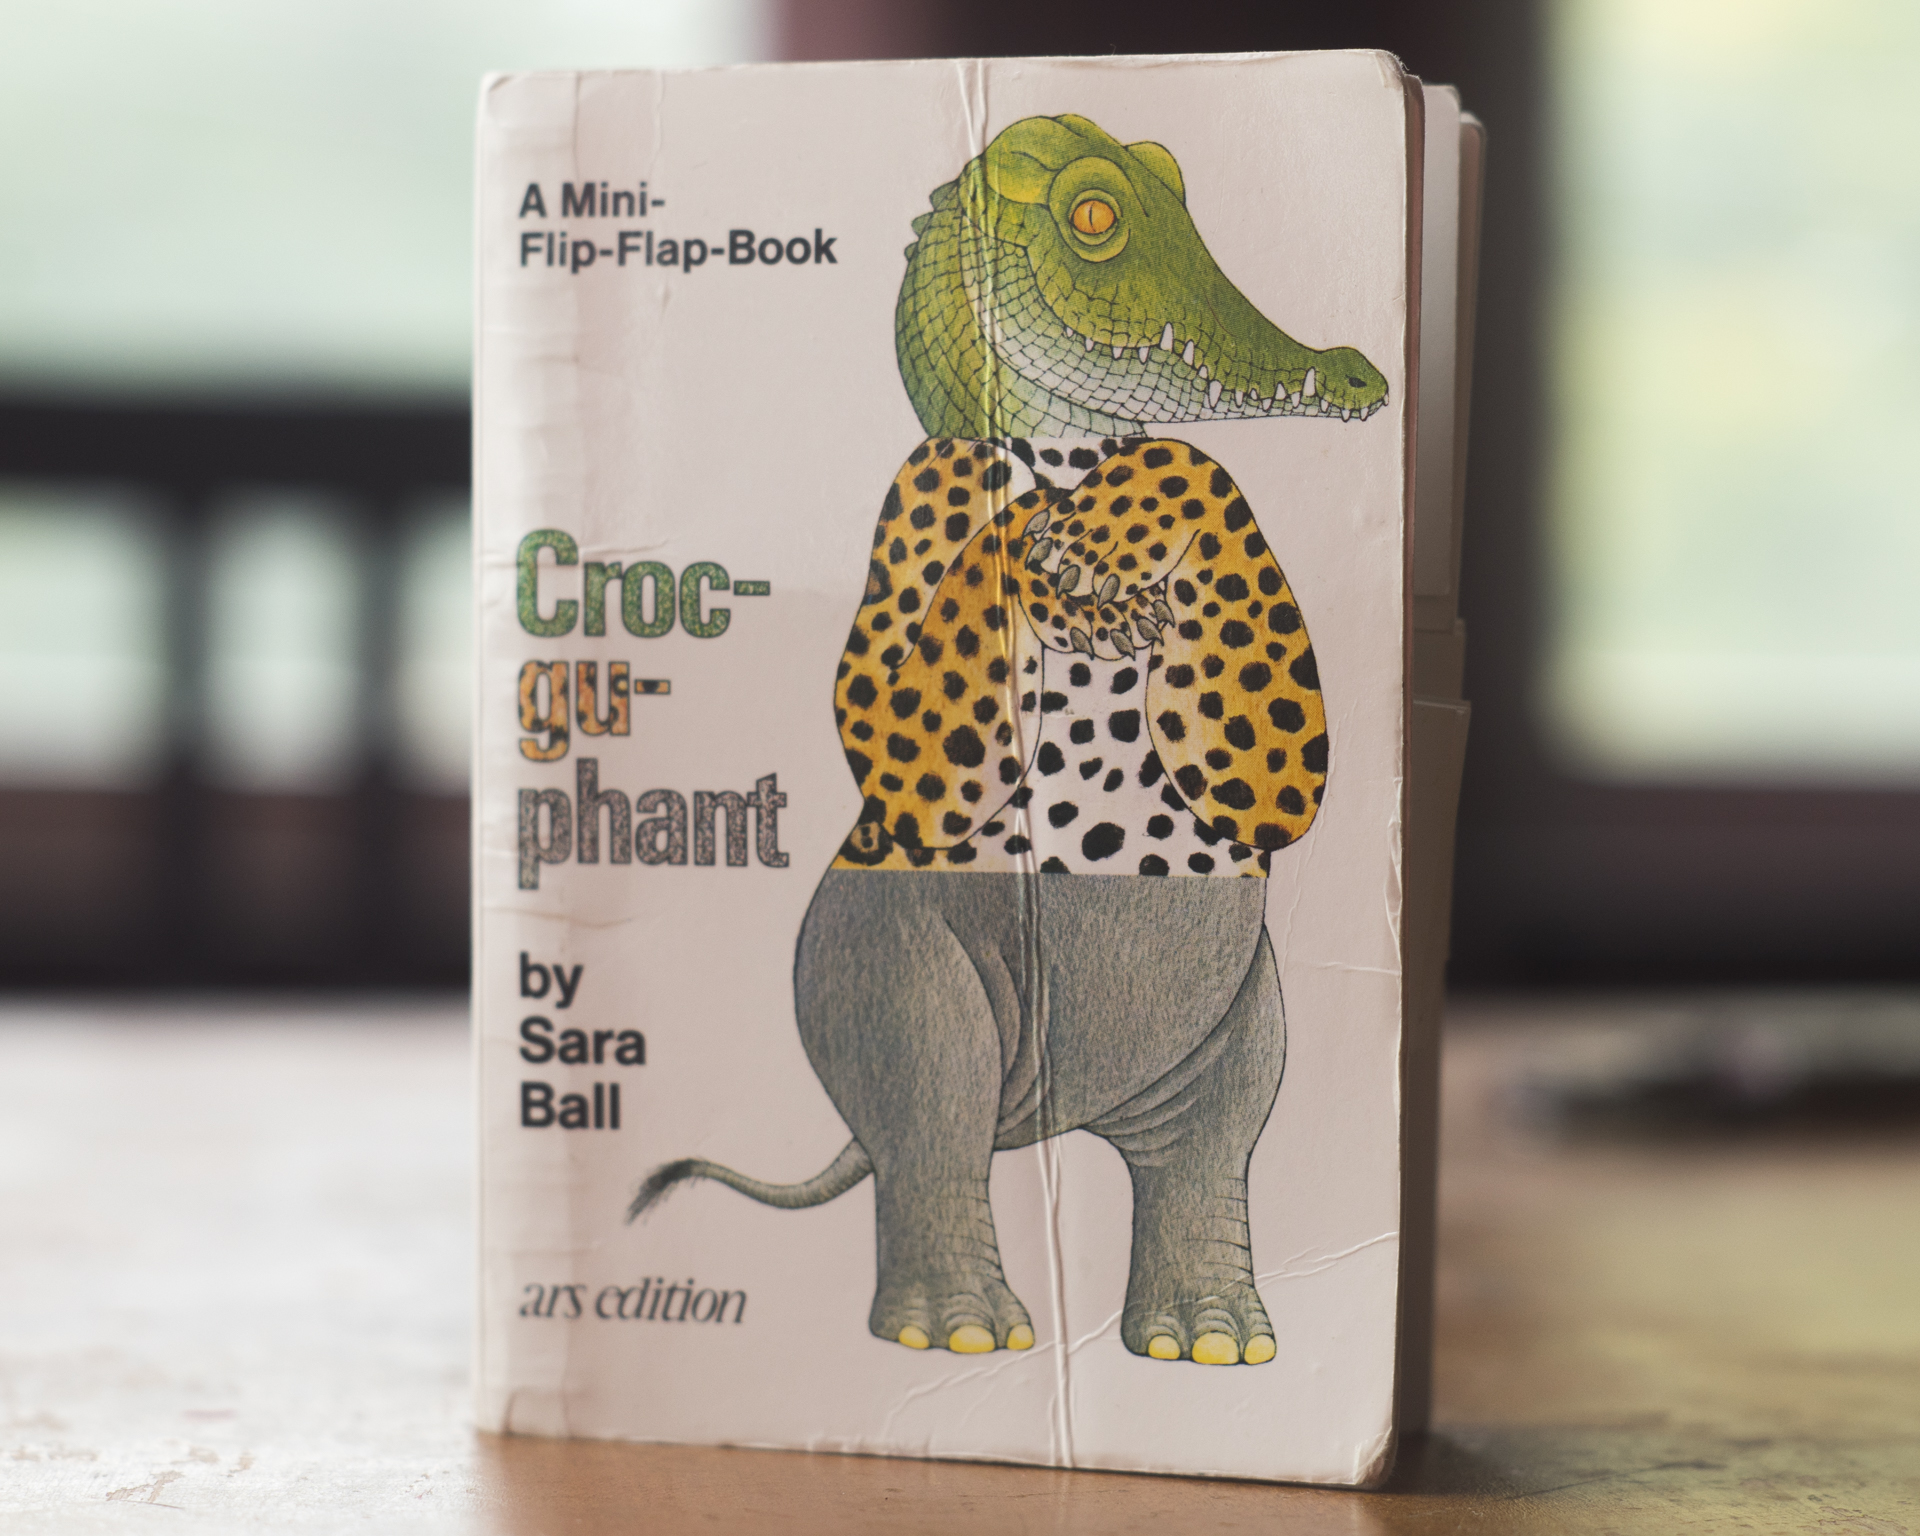 A photo of the Mini-Flip-Flap-Book 'Croc-gu-phant' by Sara Ball sitting upright on a wooden table